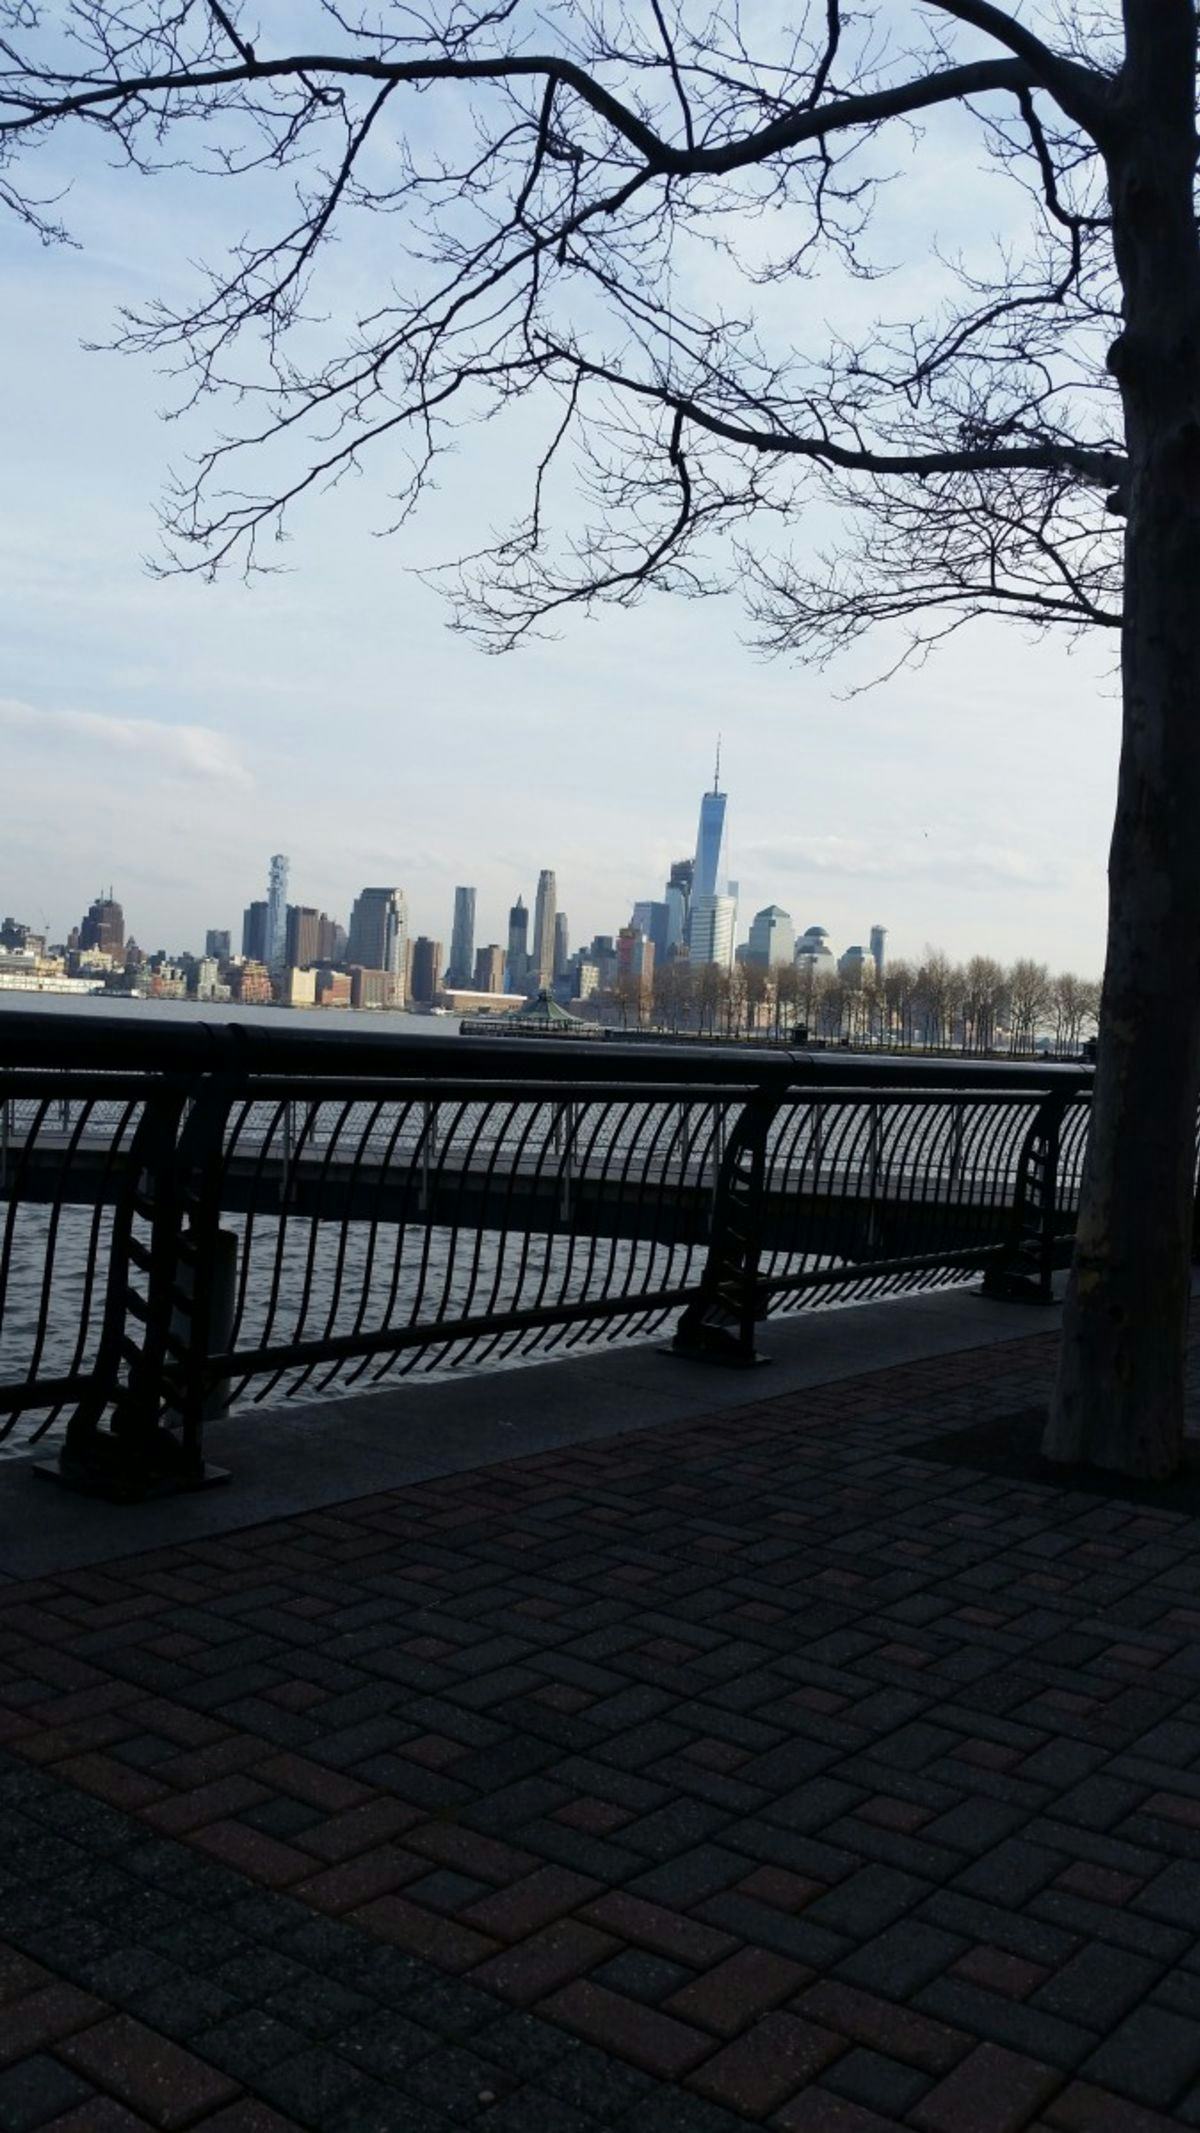 A view of the NYC skylike and Hudson River from Hoboken, N.J